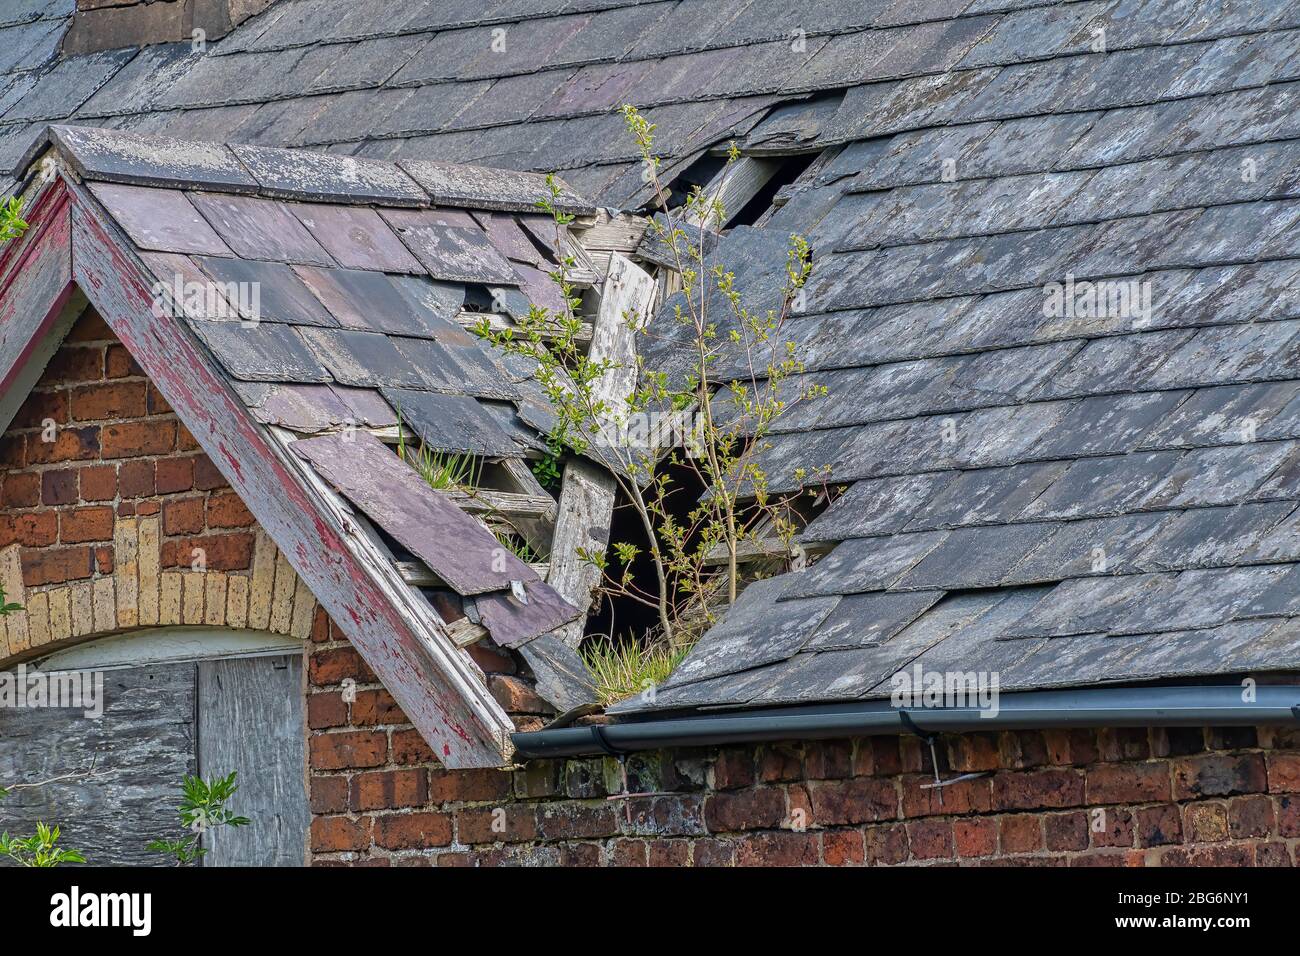 Damaged slate roof tiles on a pitched roof on a derelict house Stock Photo